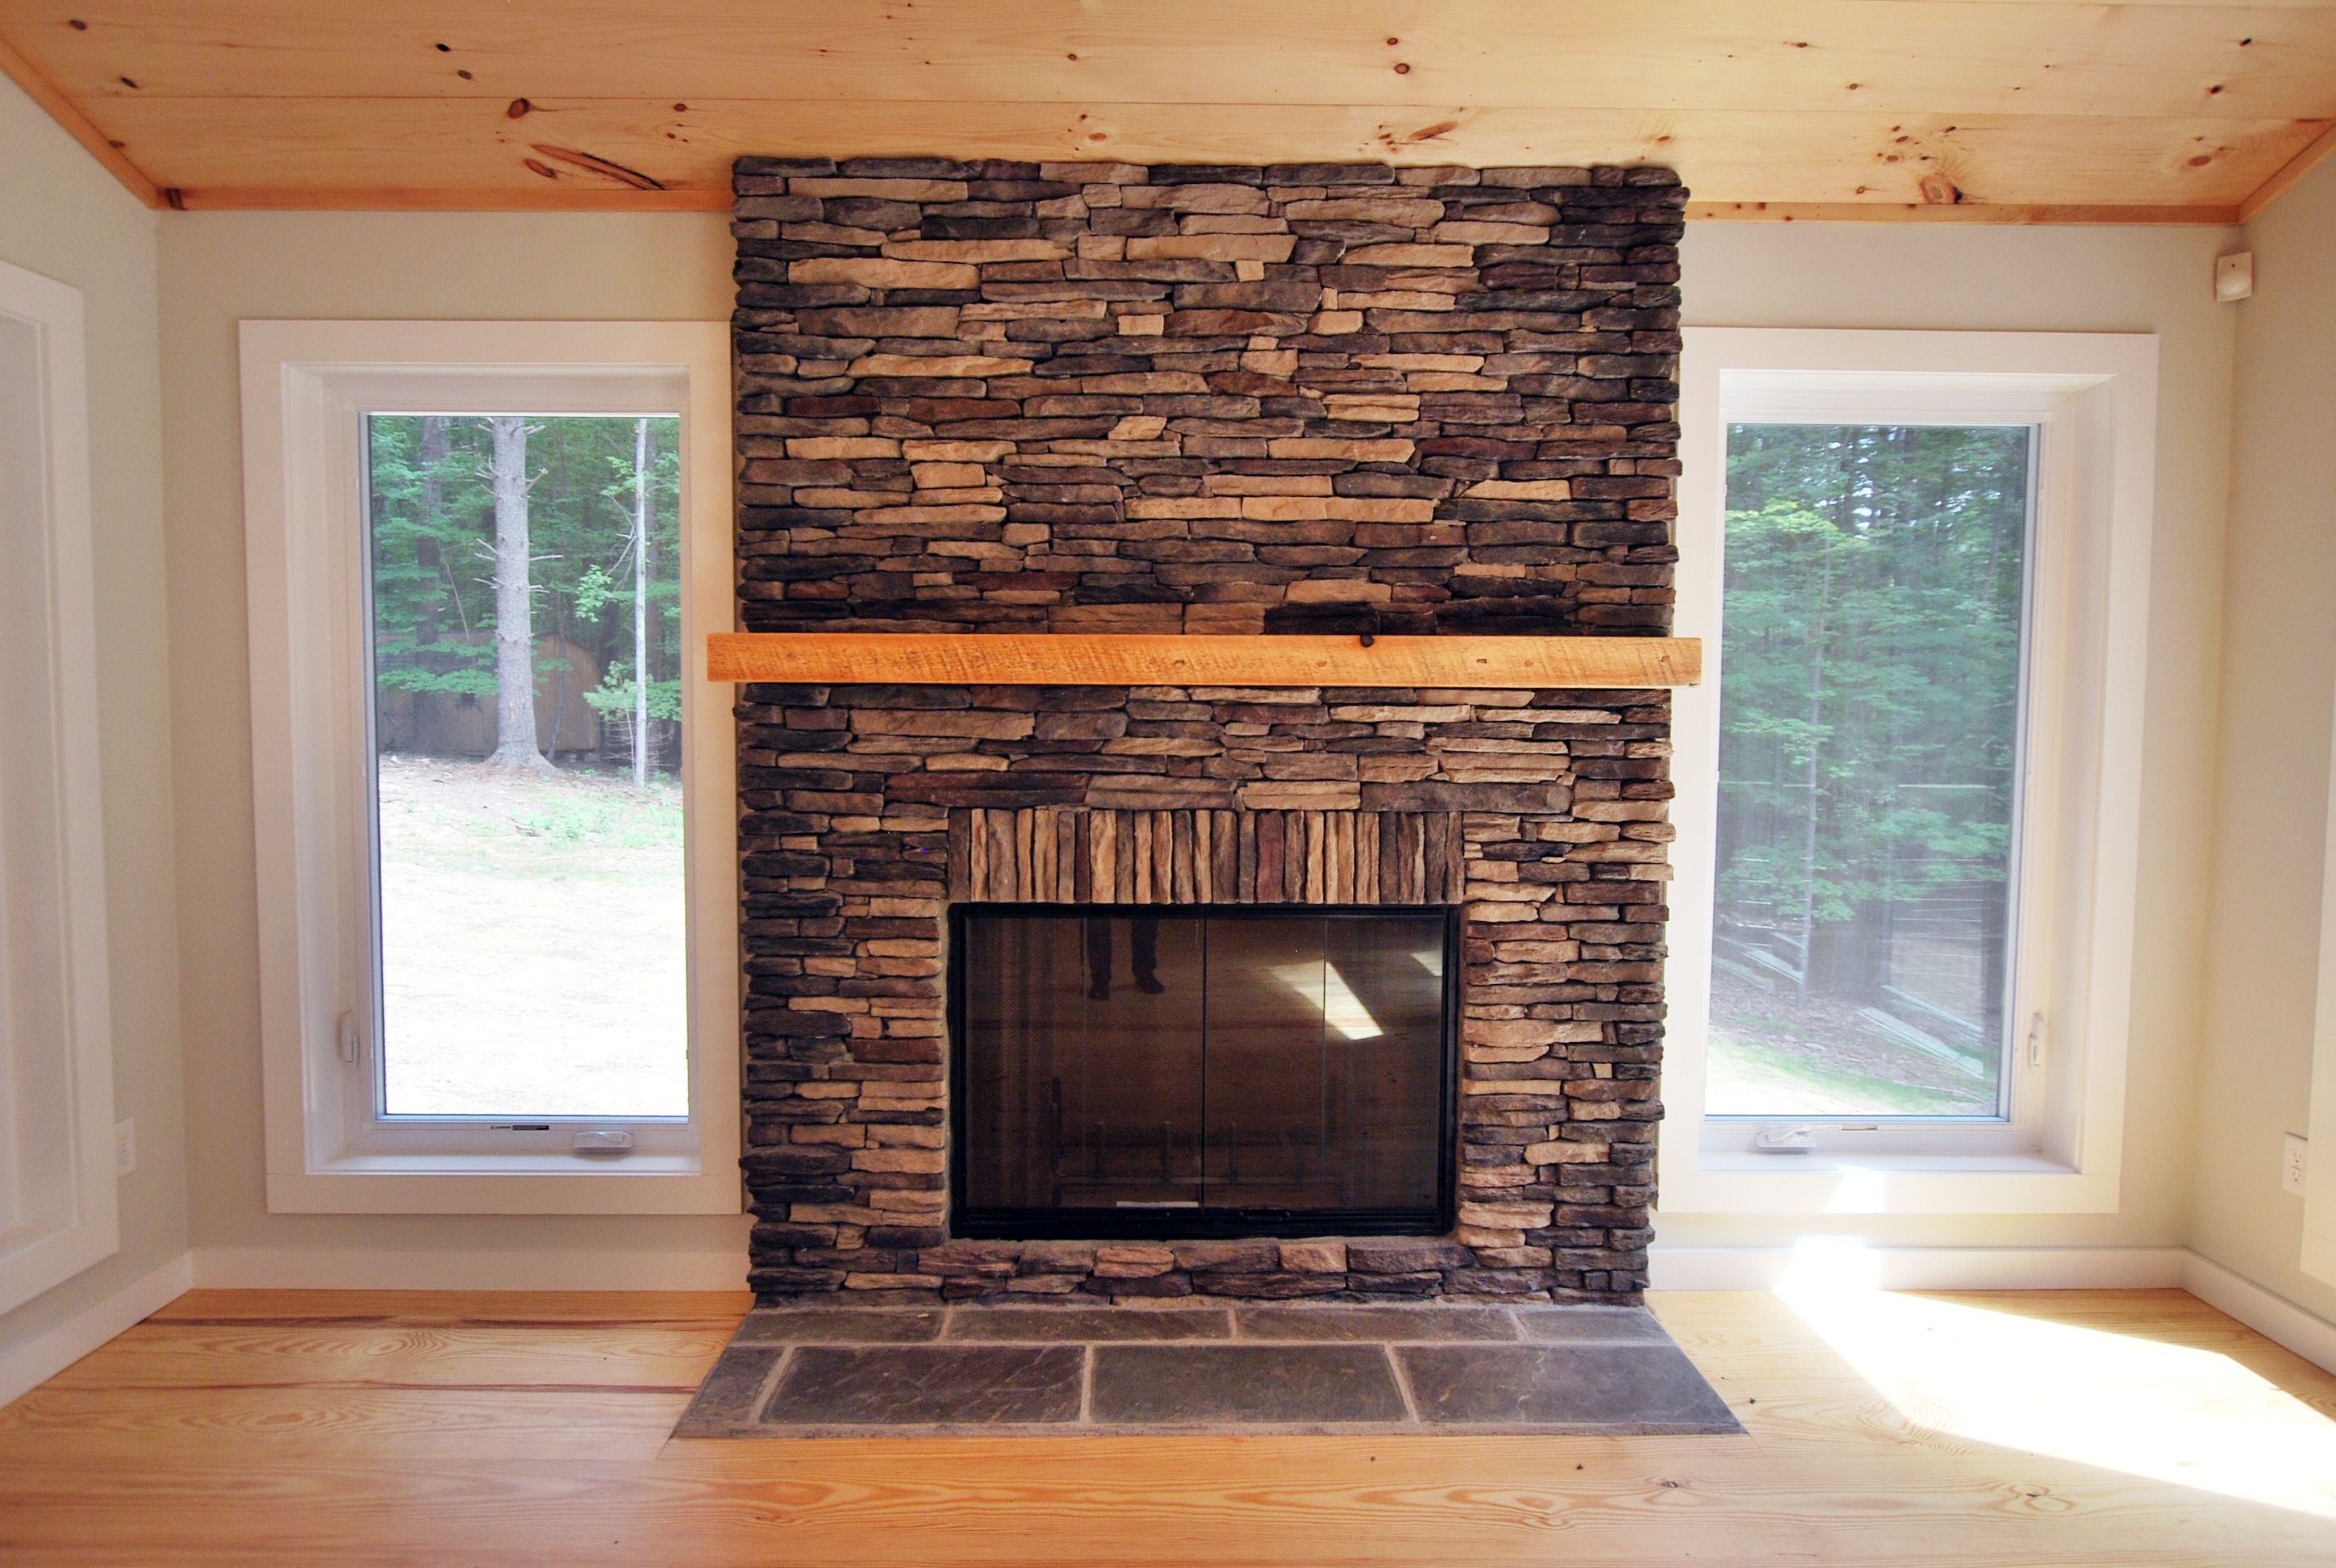 Remove Fireplace Mantel Elegant Tennessee Laurel Cavern Ledge Stone with A Smooth Beam